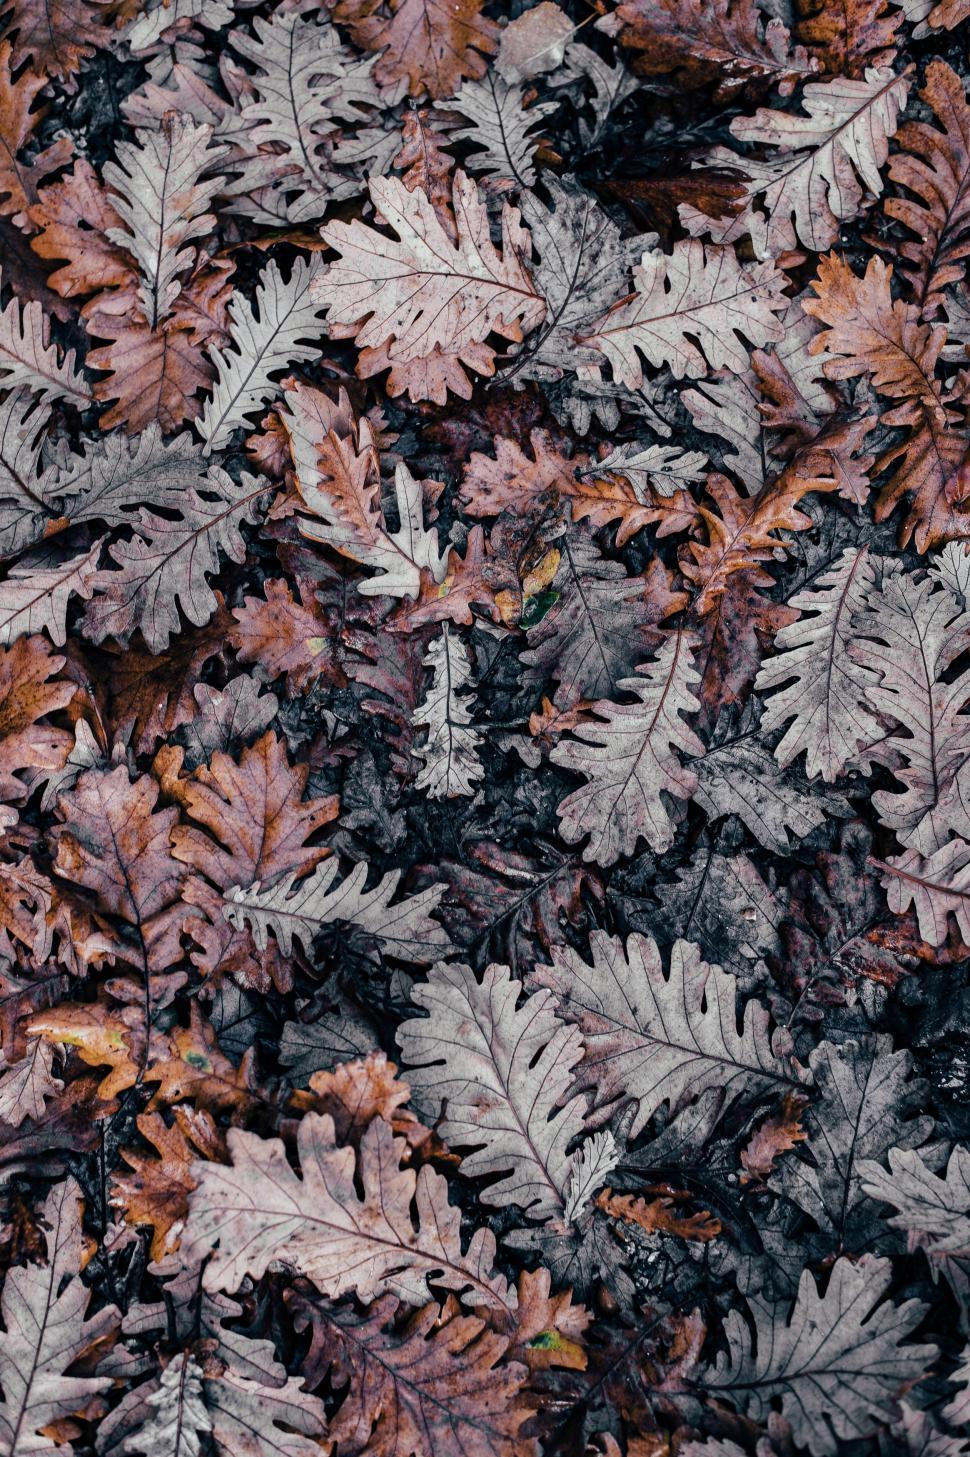 Free Image of Pile of Fallen Leaves on the Ground 